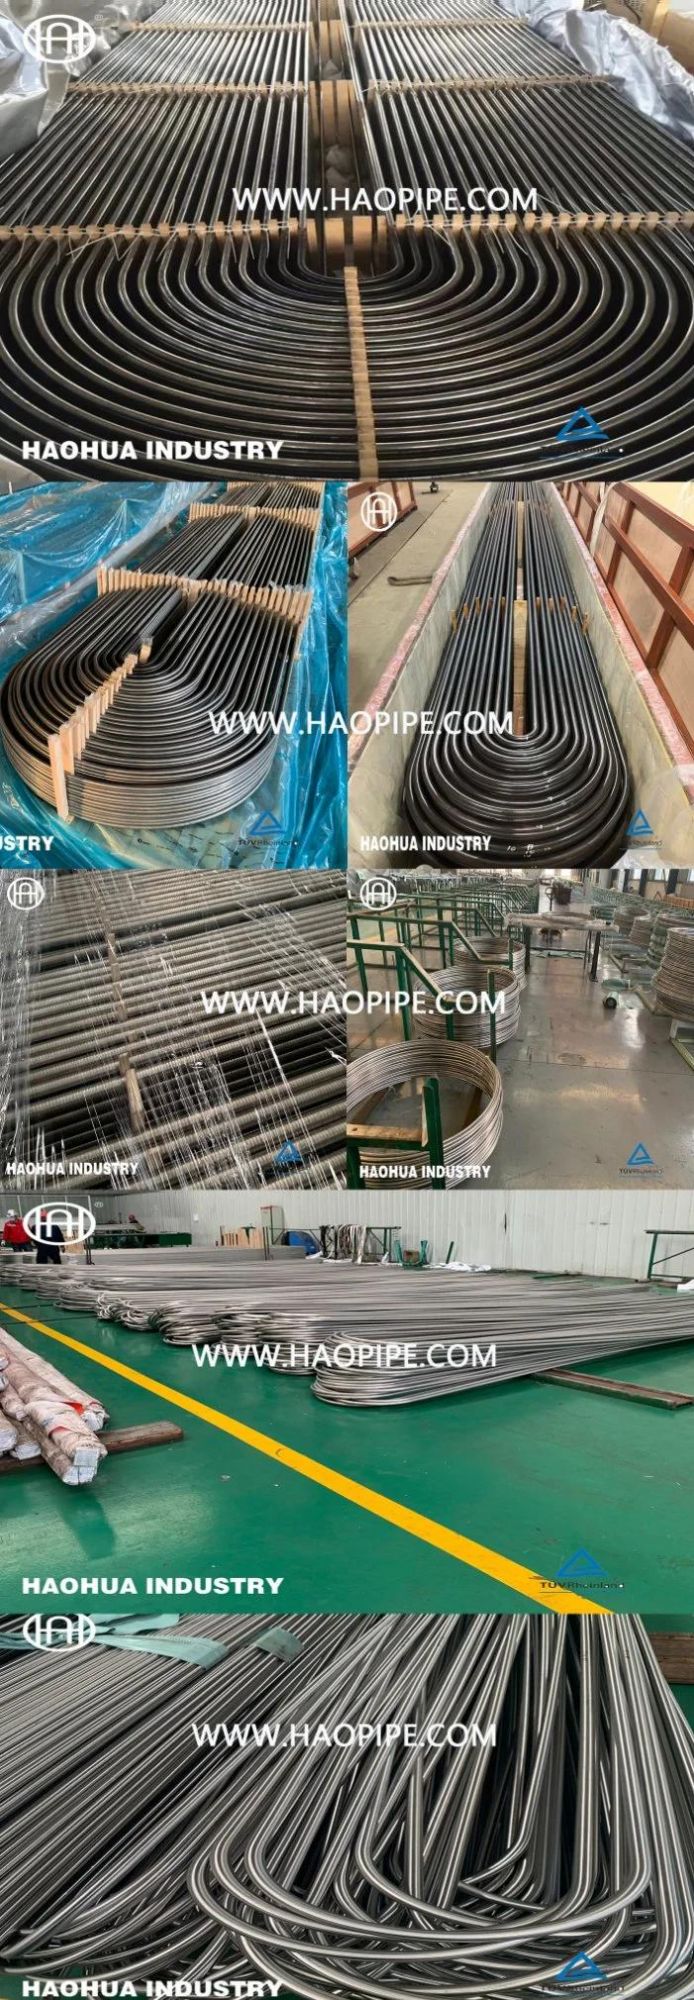 Stainless Steel Bended U Tube for Heat Exchanger